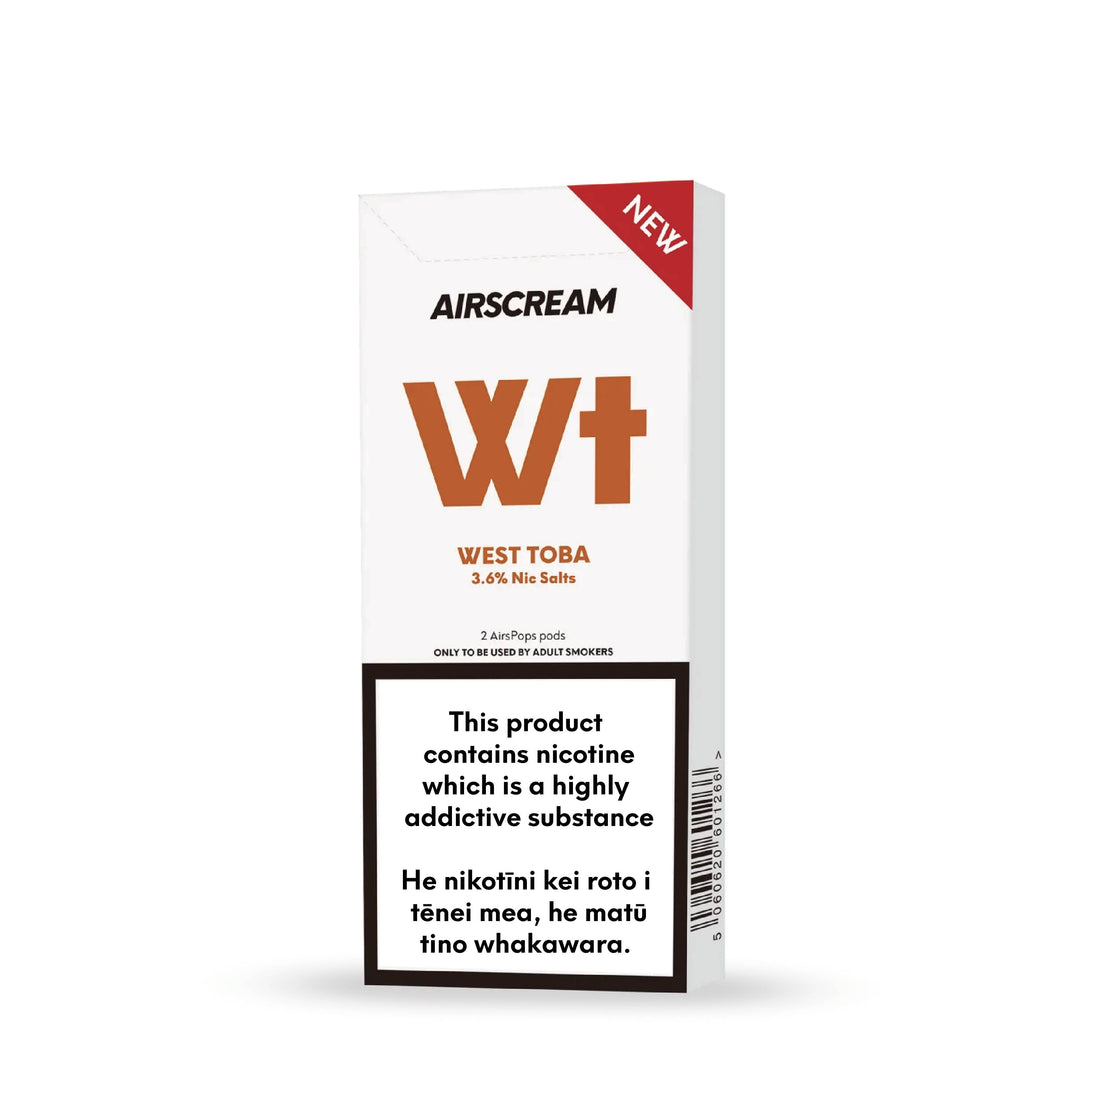 West Toba - AIRSCREAM AirsPops 2 Pods 1.6ML By VapeTrend NZ